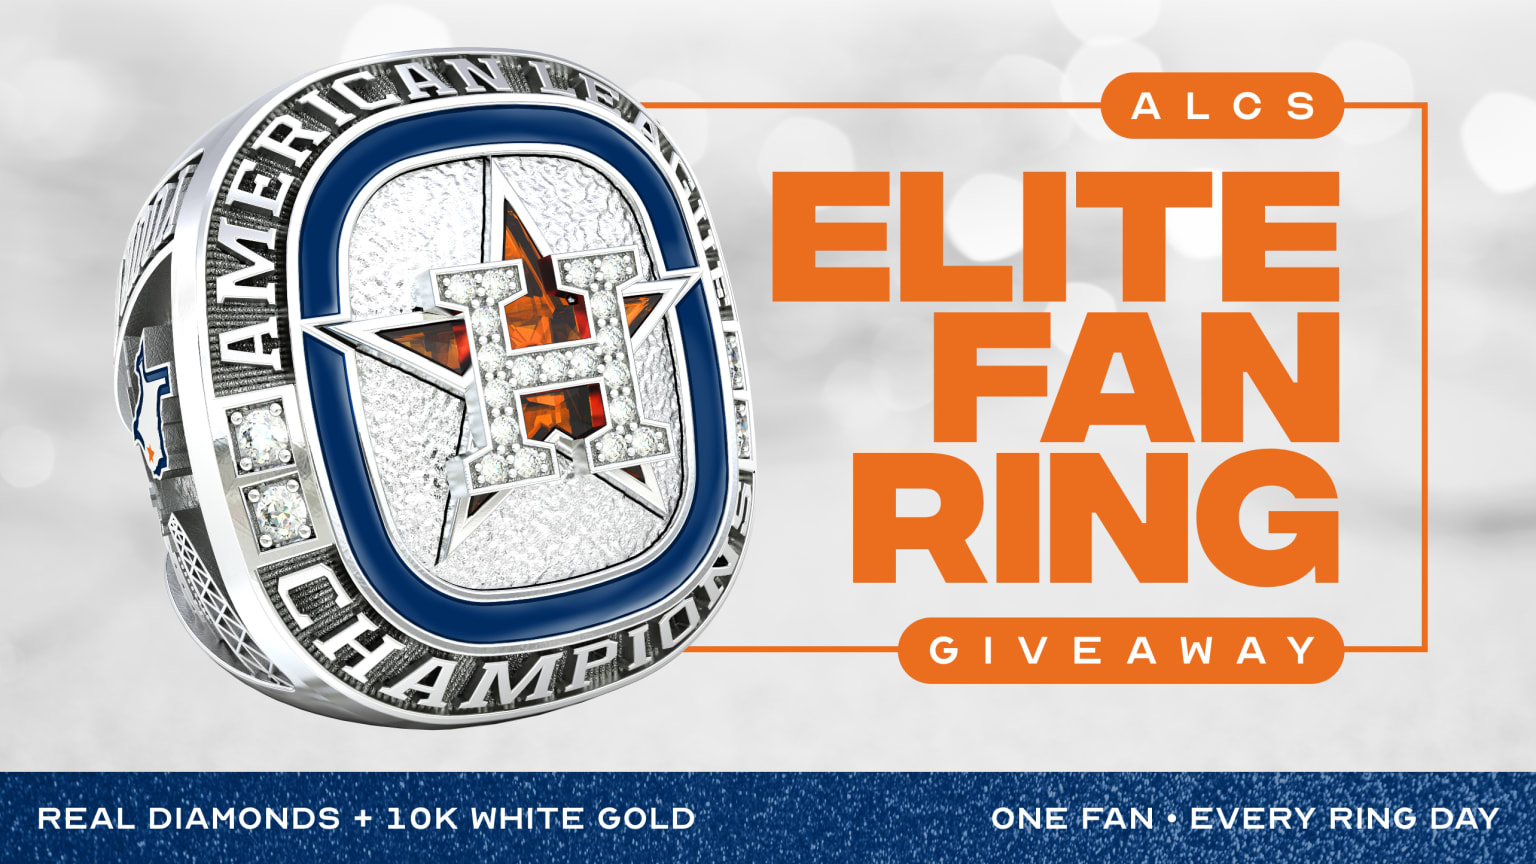 2023 HOUSTON ASTROS Championship Ring – Collect & Wear